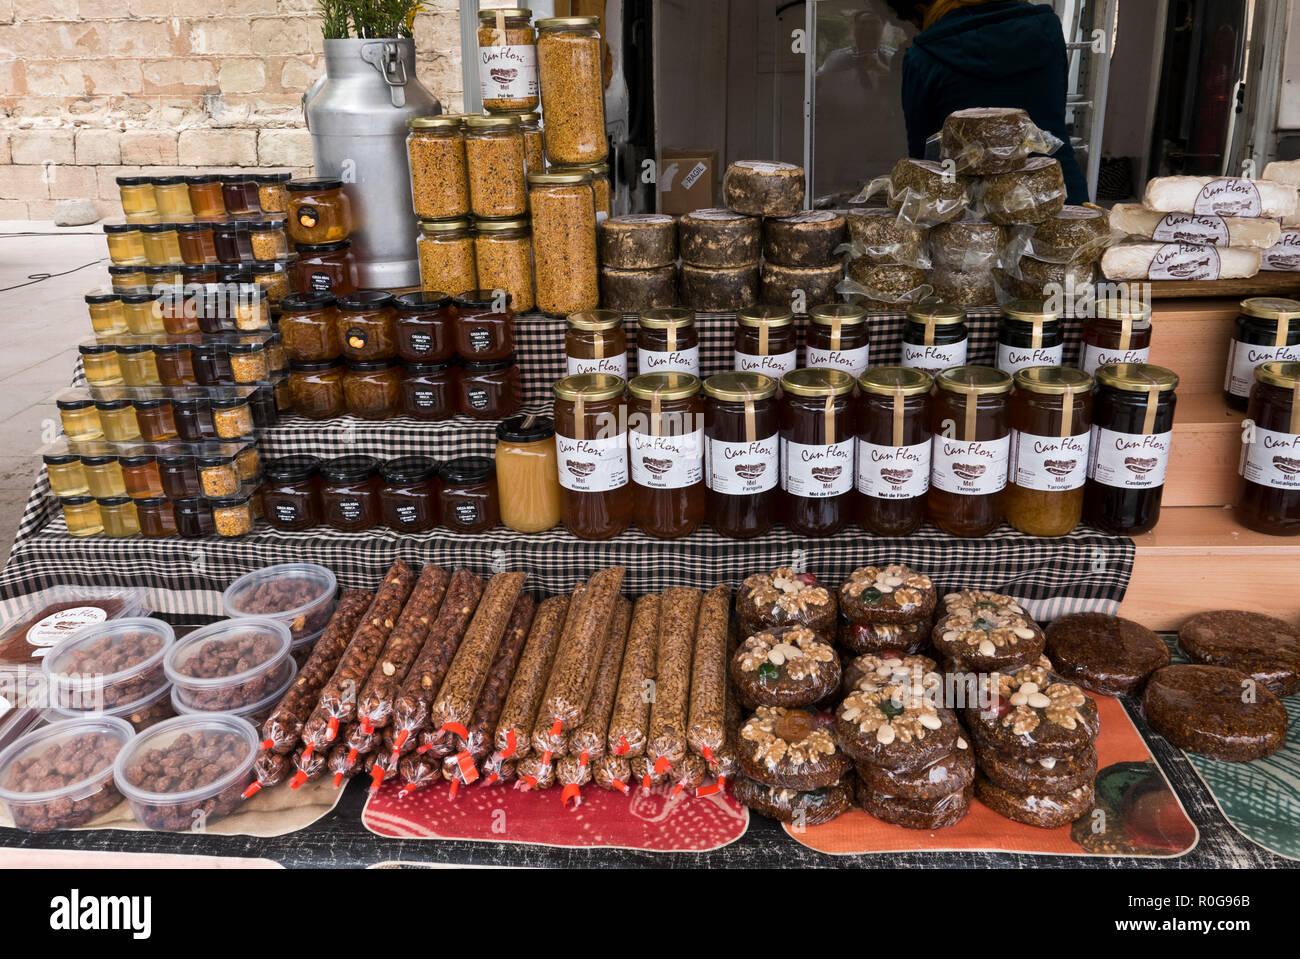 Local Produce on sale outside the Monastery walls along the street in Montserrat, Barcelona, Spain Stock Photo